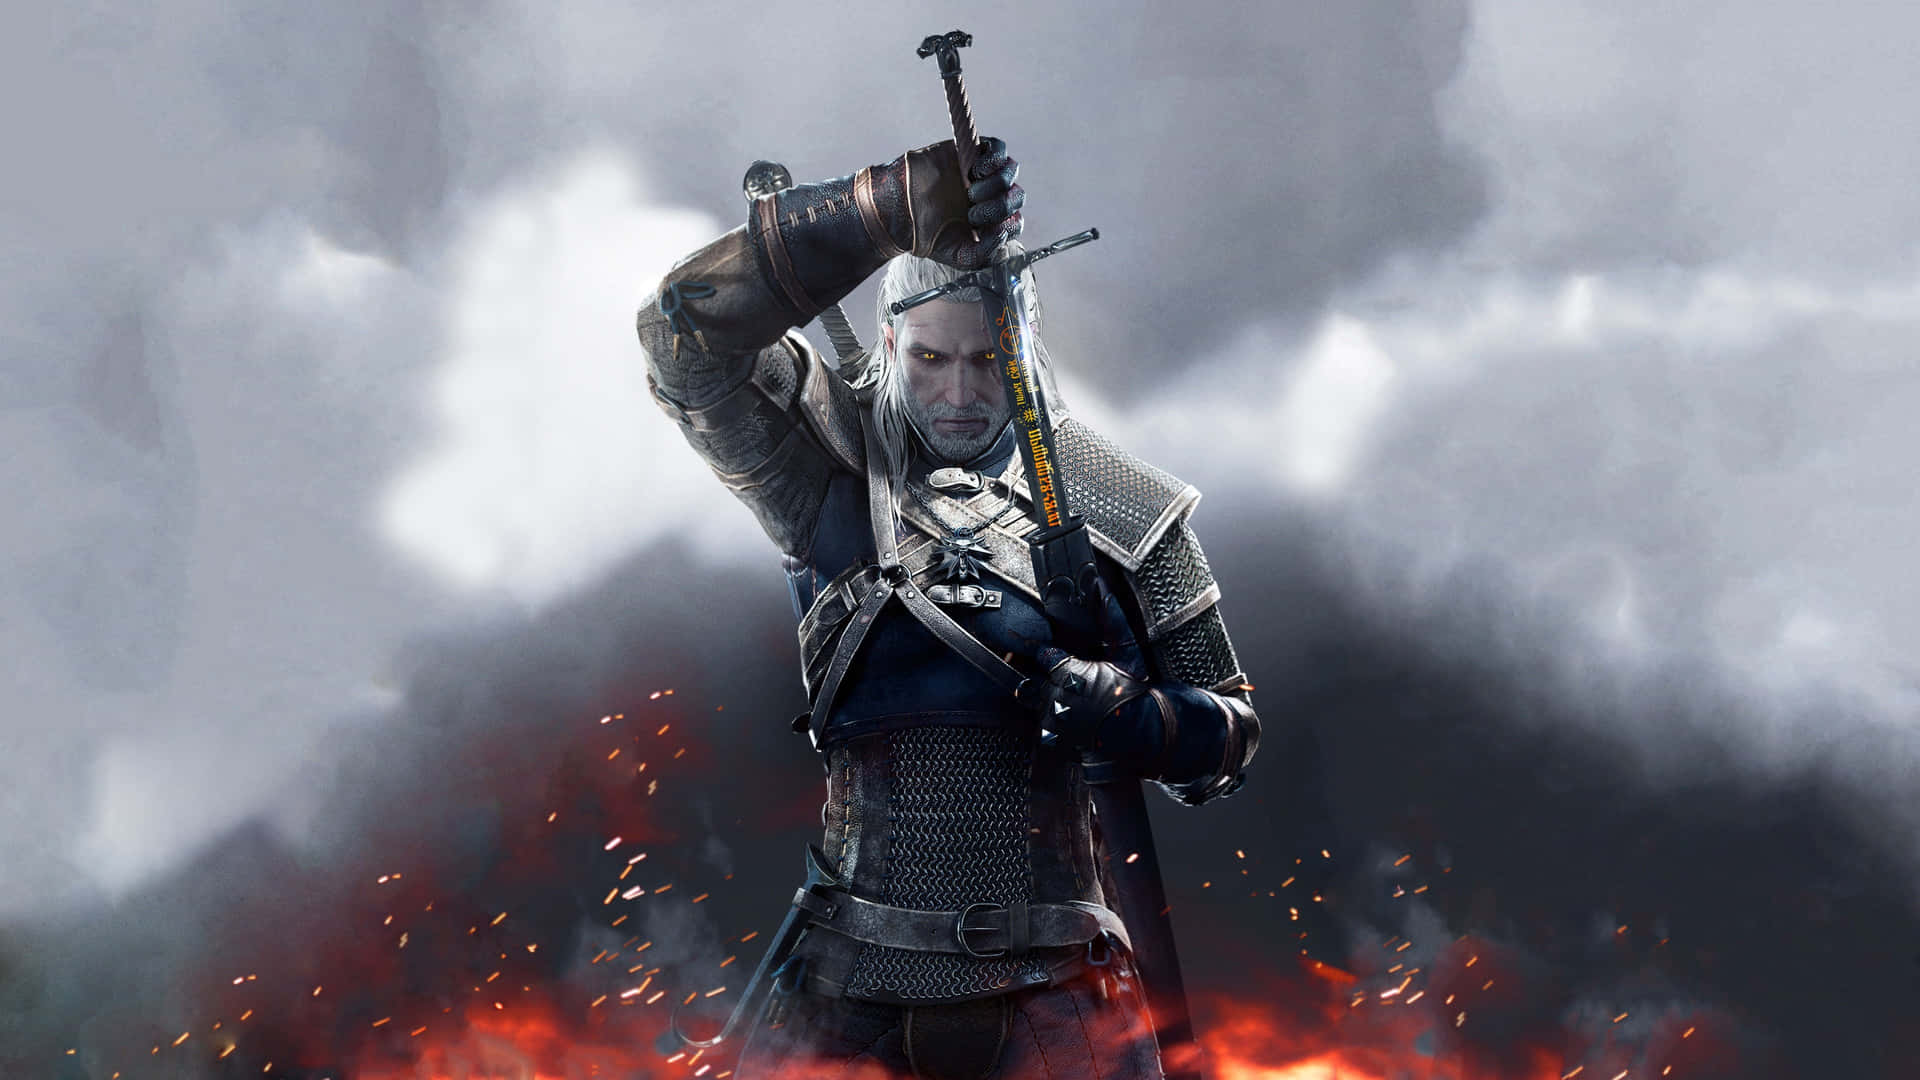 Follow Geralt on his epic journey in The Witcher 3